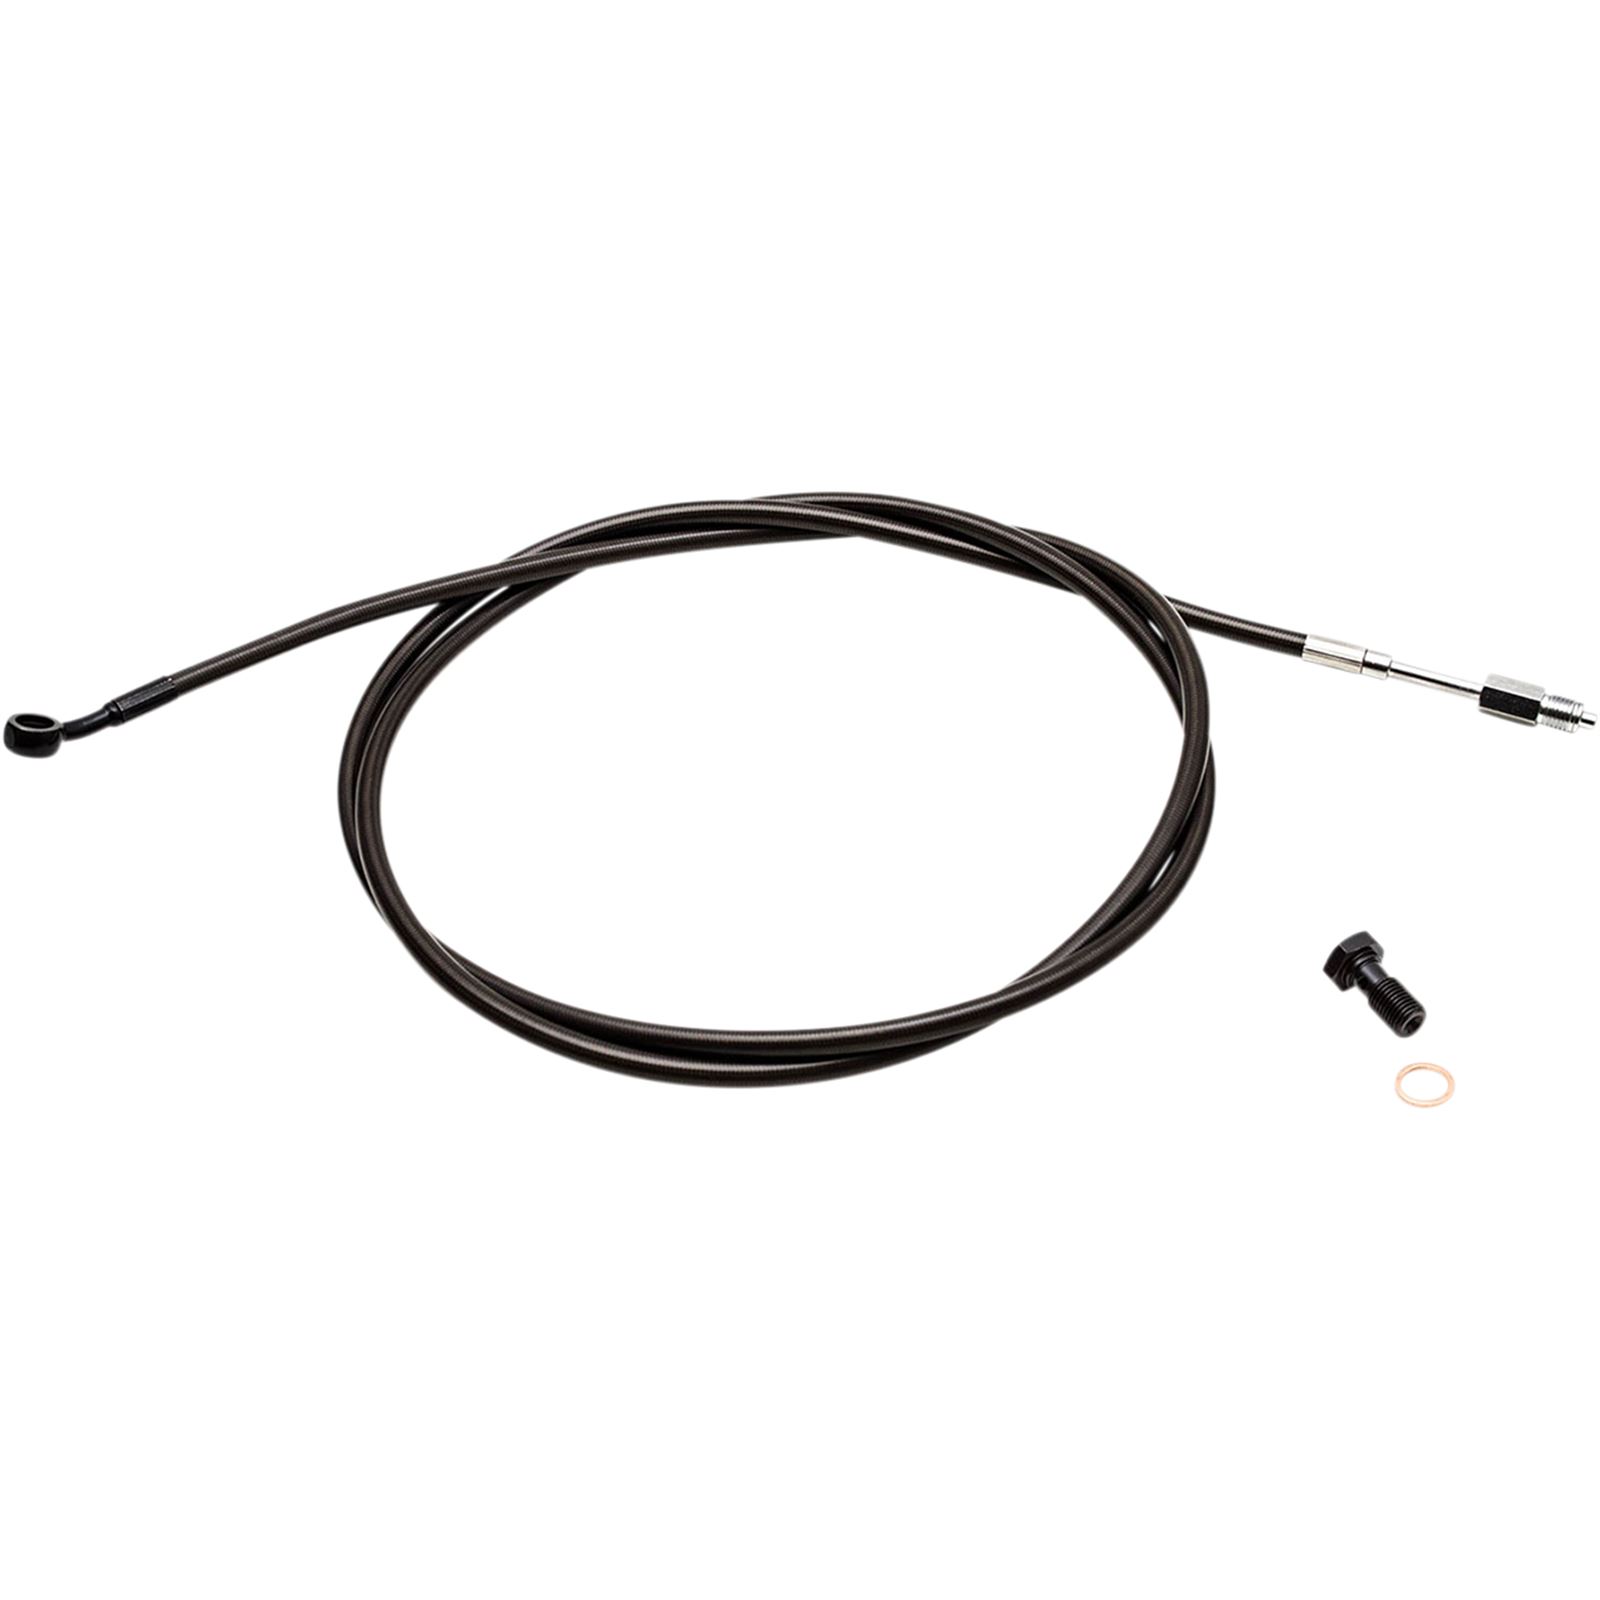 LA Choppers Clutch Cable - Midnight - 18"-20"